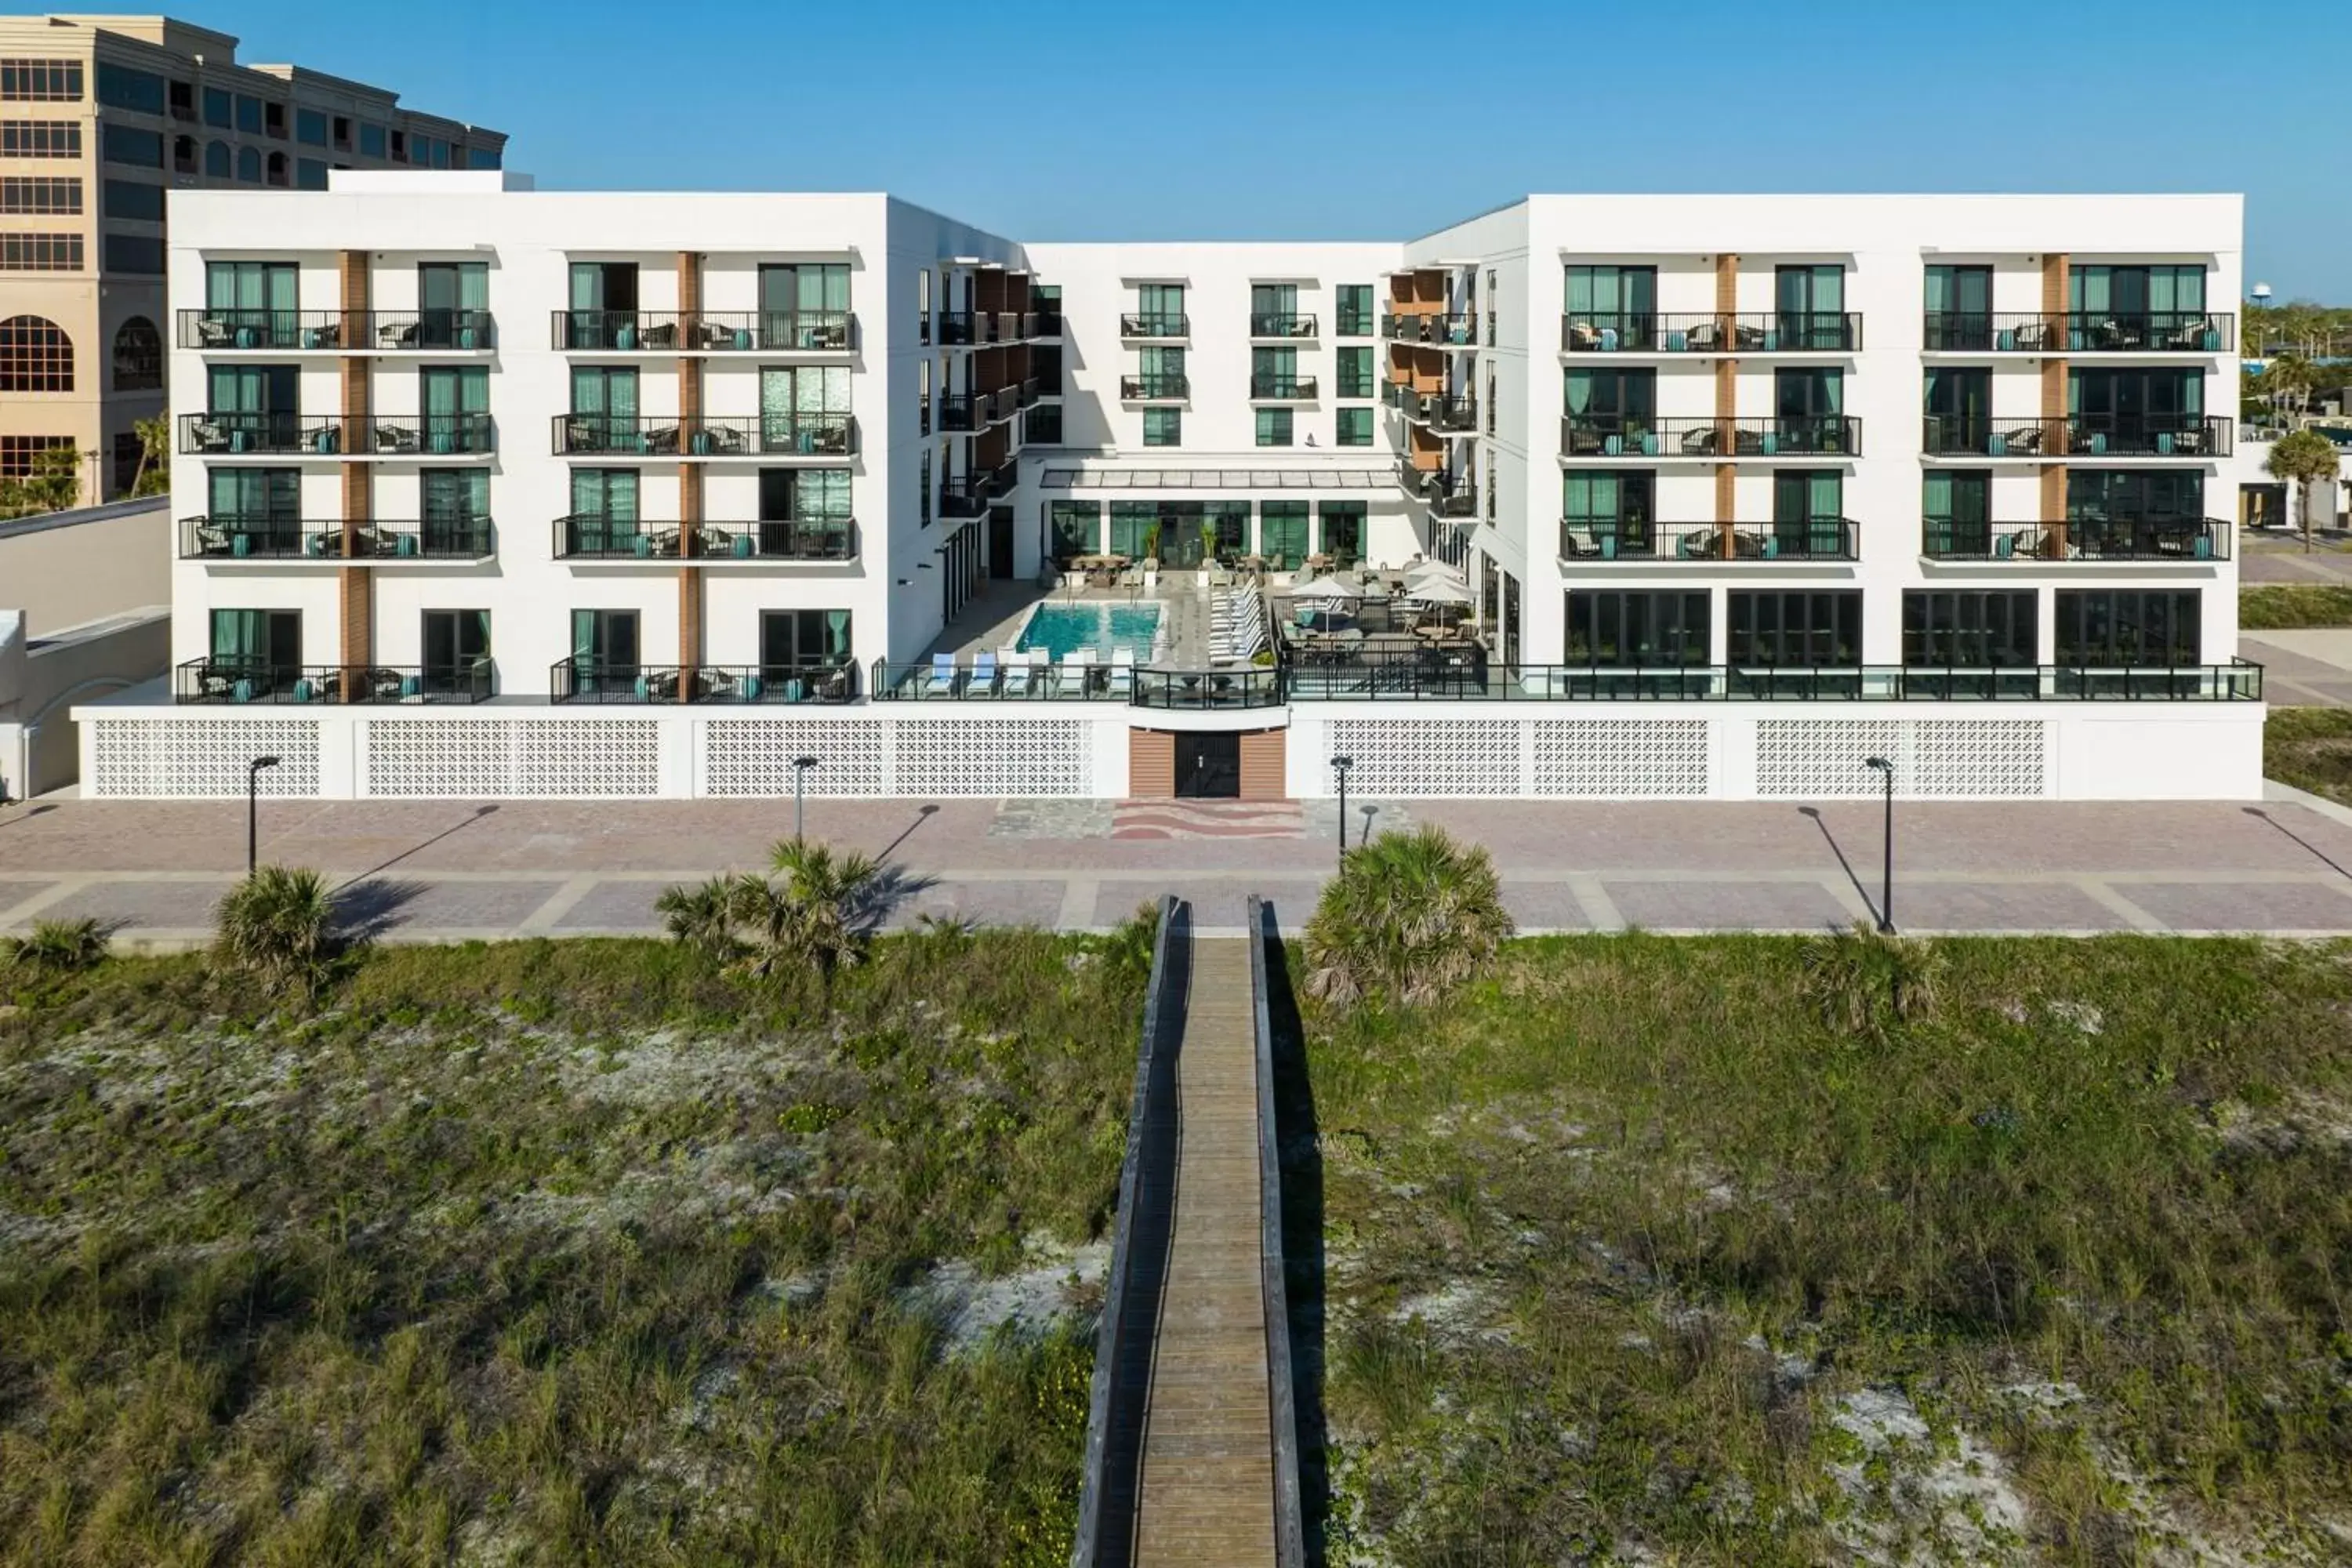 Property Building in SpringHill Suites by Marriott Jacksonville Beach Oceanfront